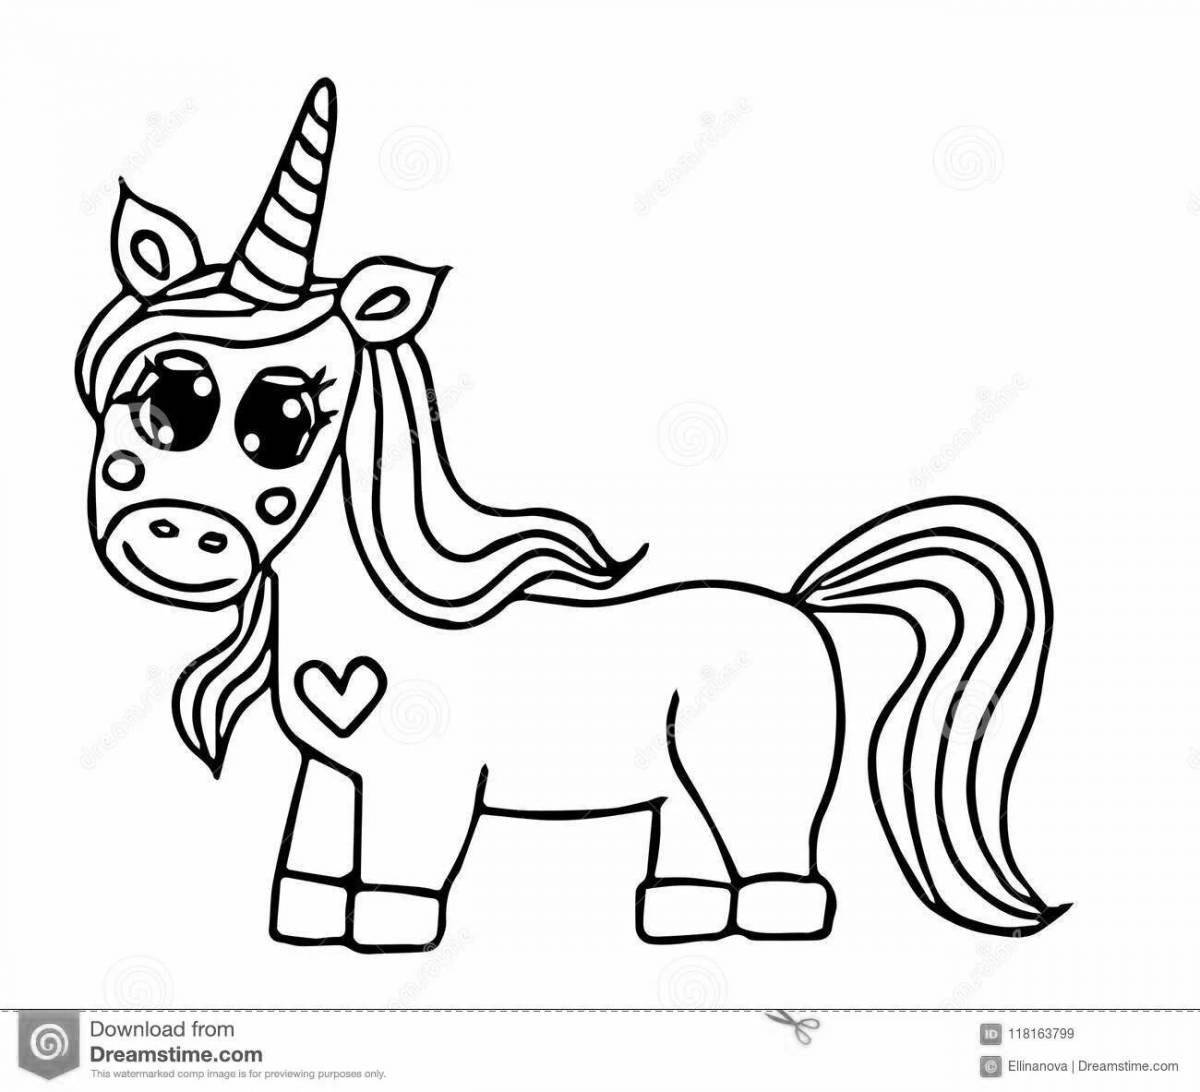 Radiant doggy unicorn coloring page